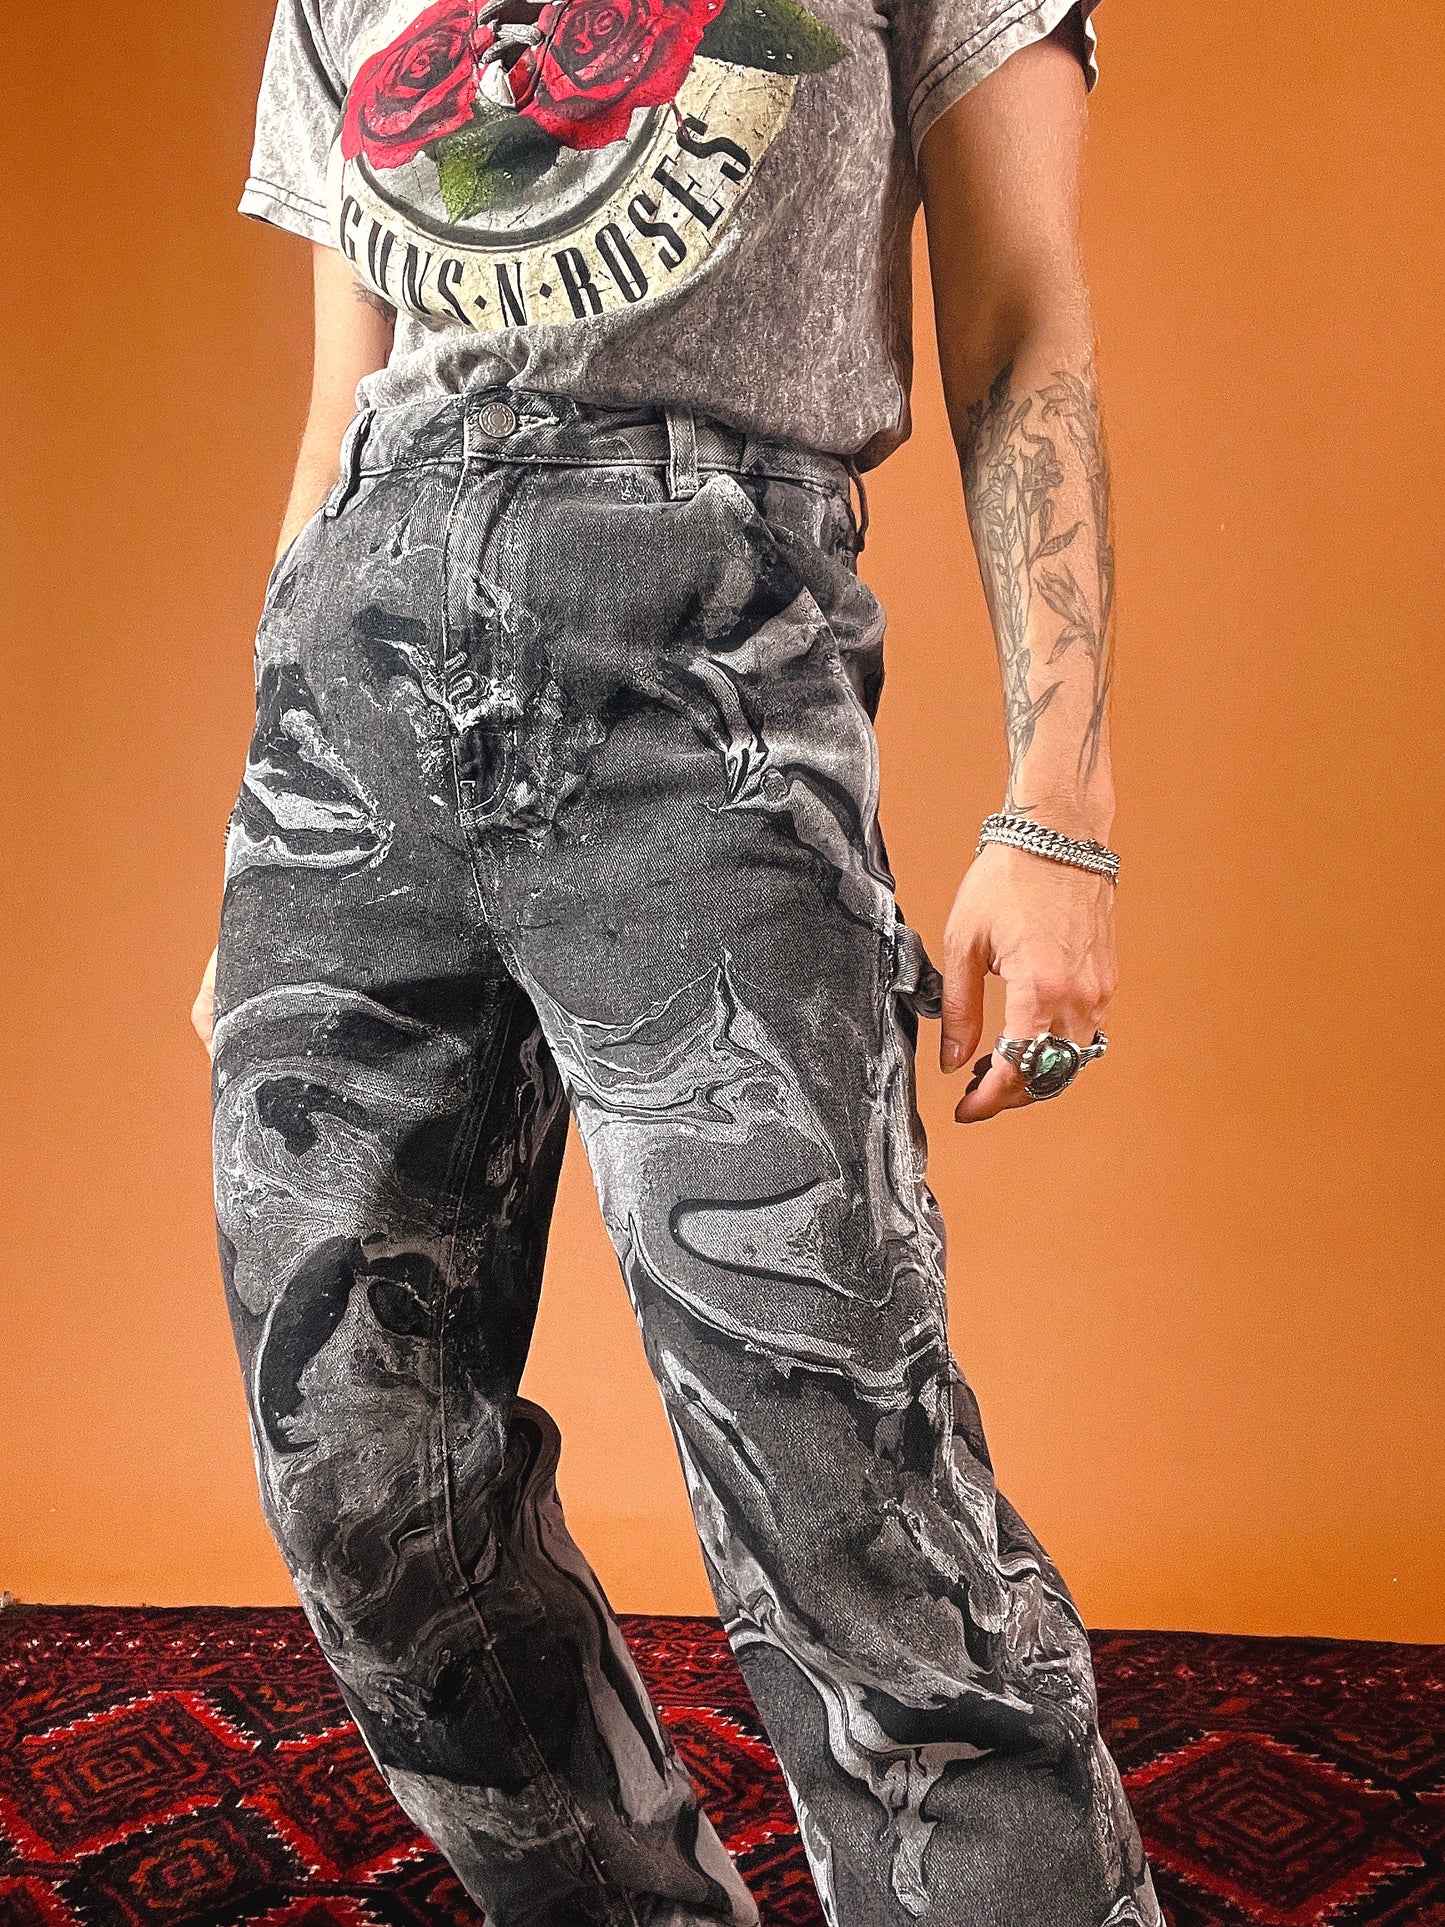 The Marbled Grey Carpenter Jeans - 27/28"